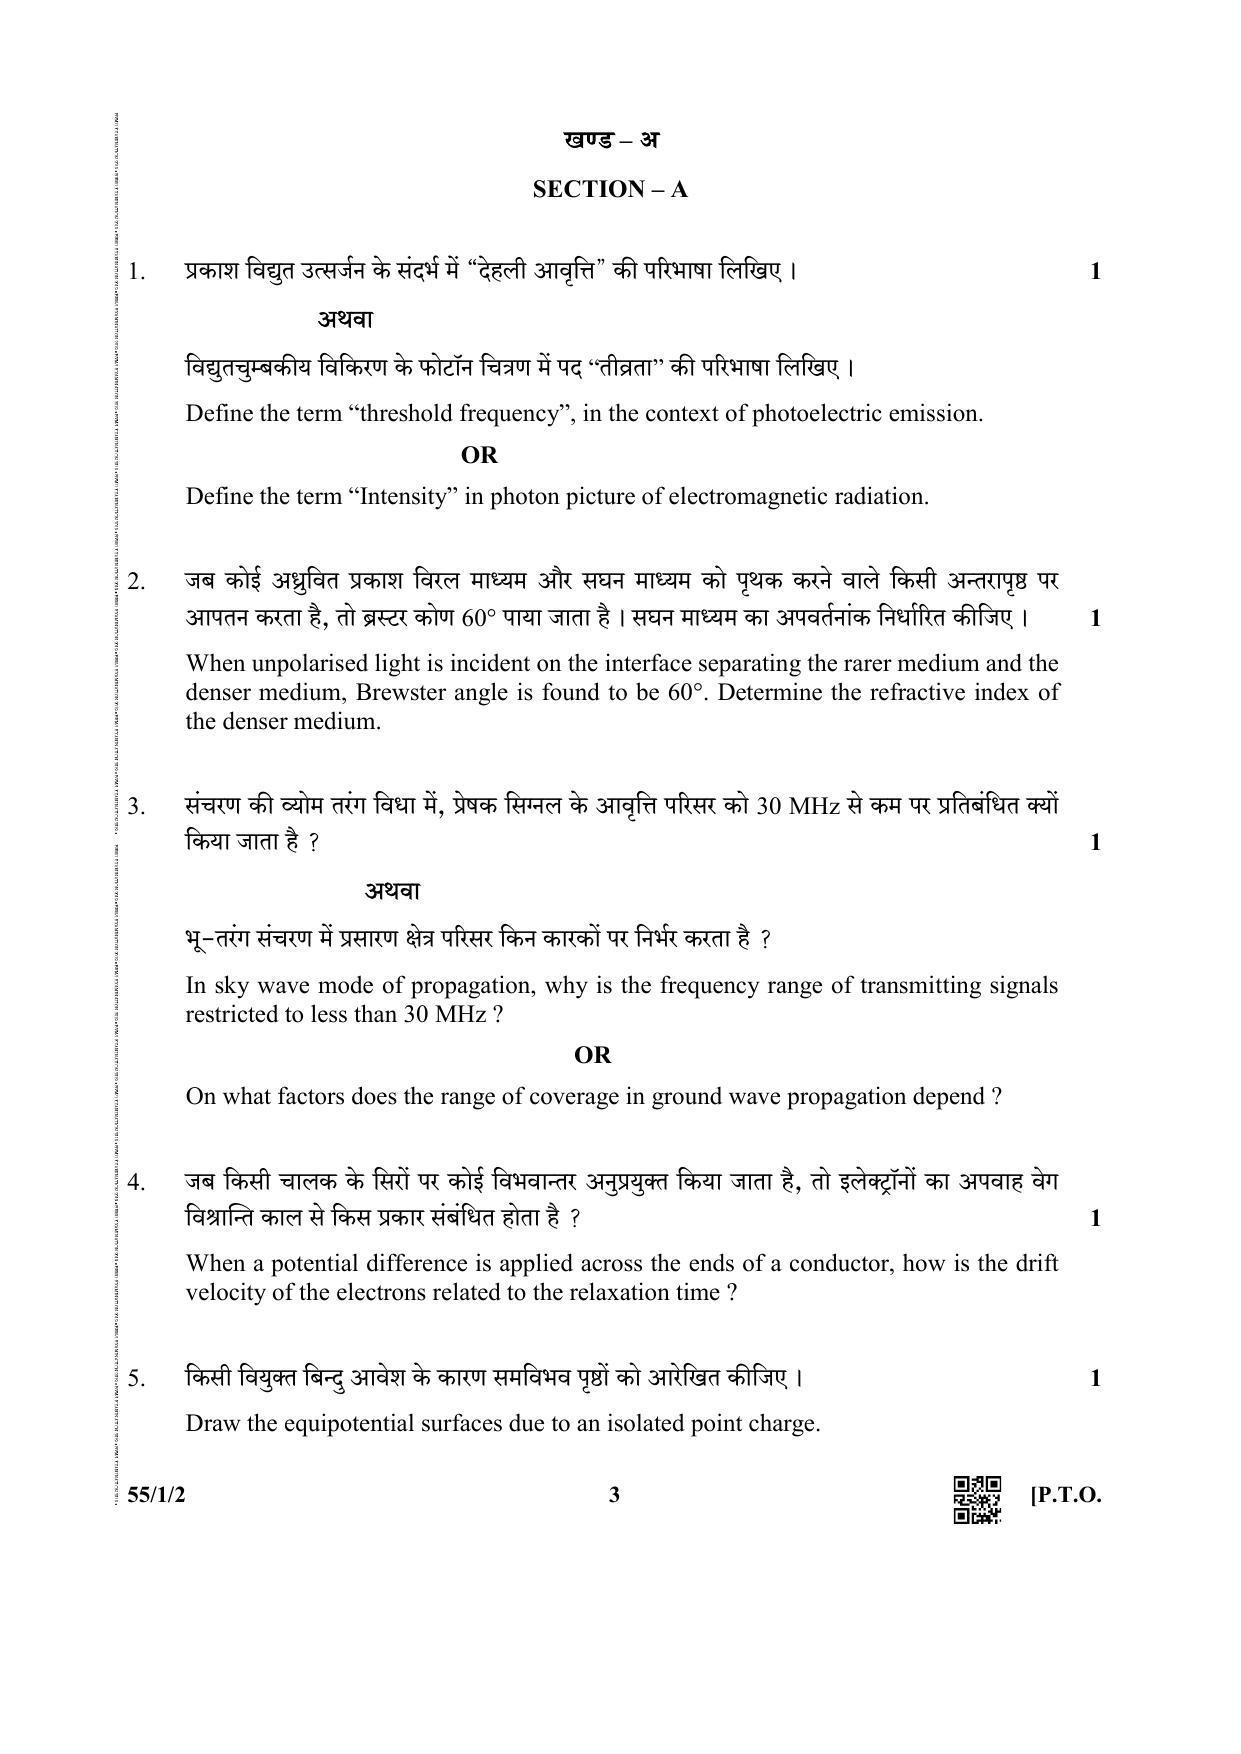 CBSE Class 12 55-1-2 (Physics) 2019 Question Paper - Page 3